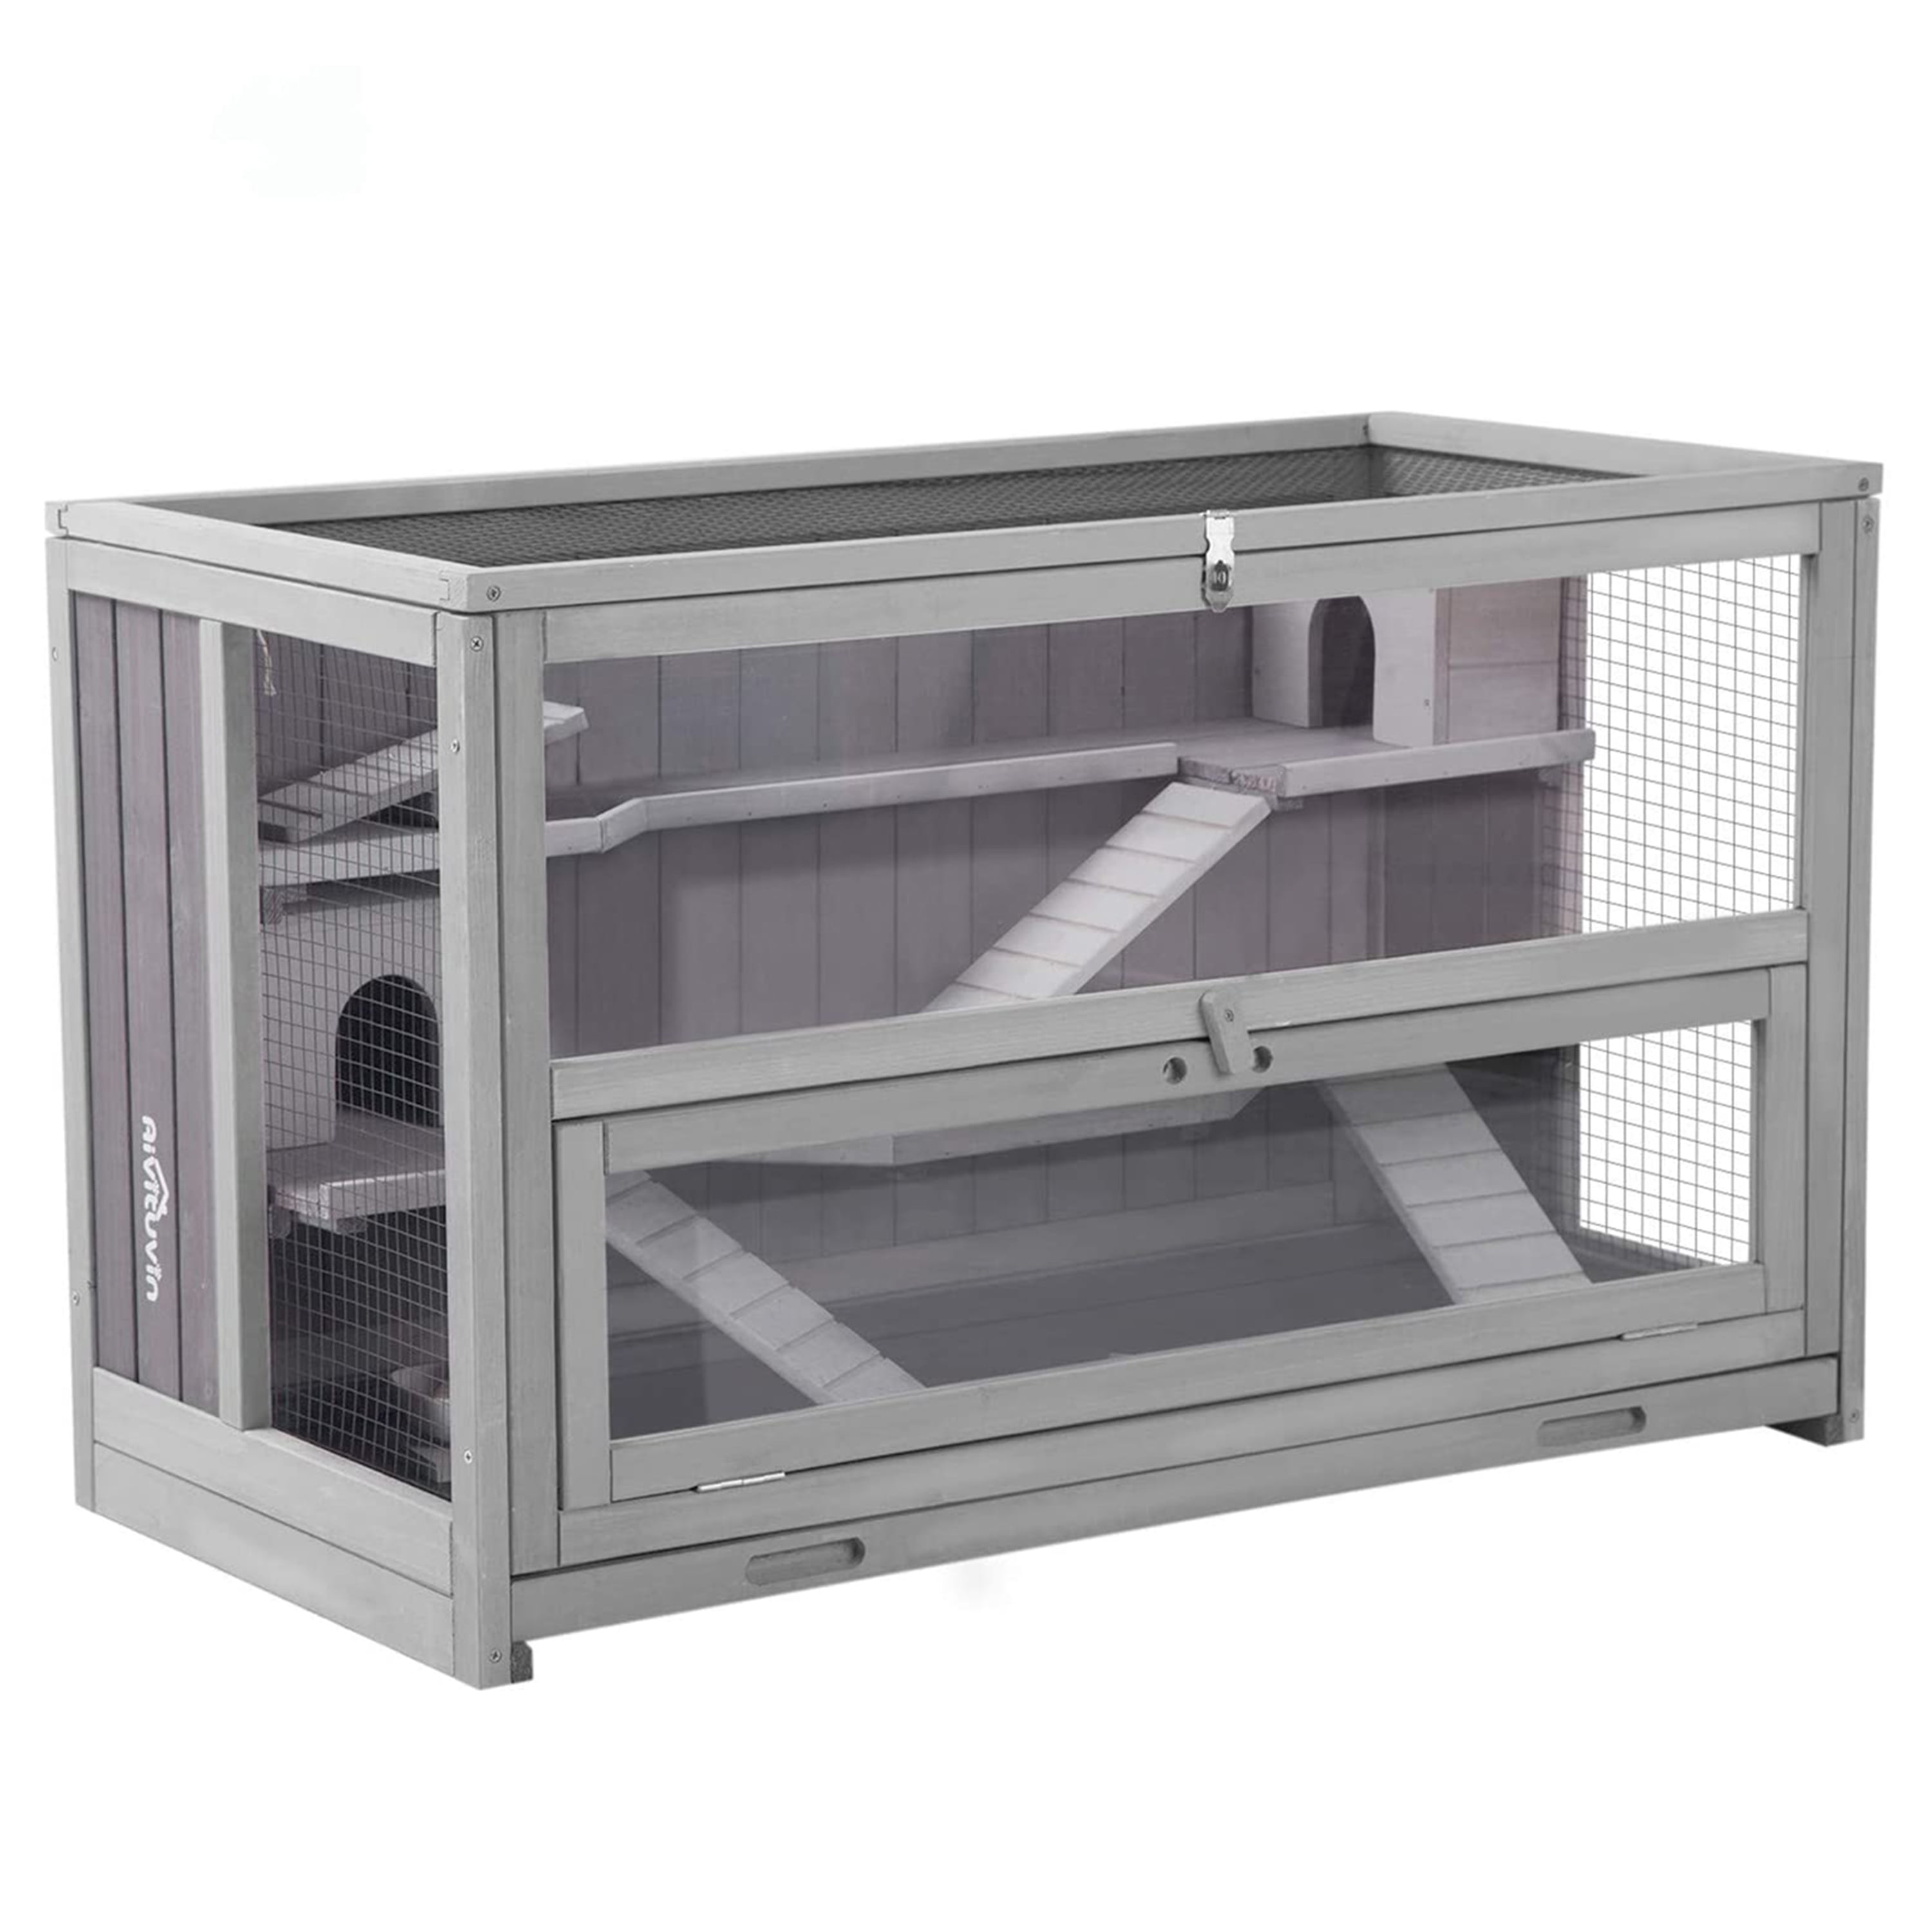 Chinchilla Guinea Pig Rat Animal Hamster Cage With Cross Shelves & Ladders 818 